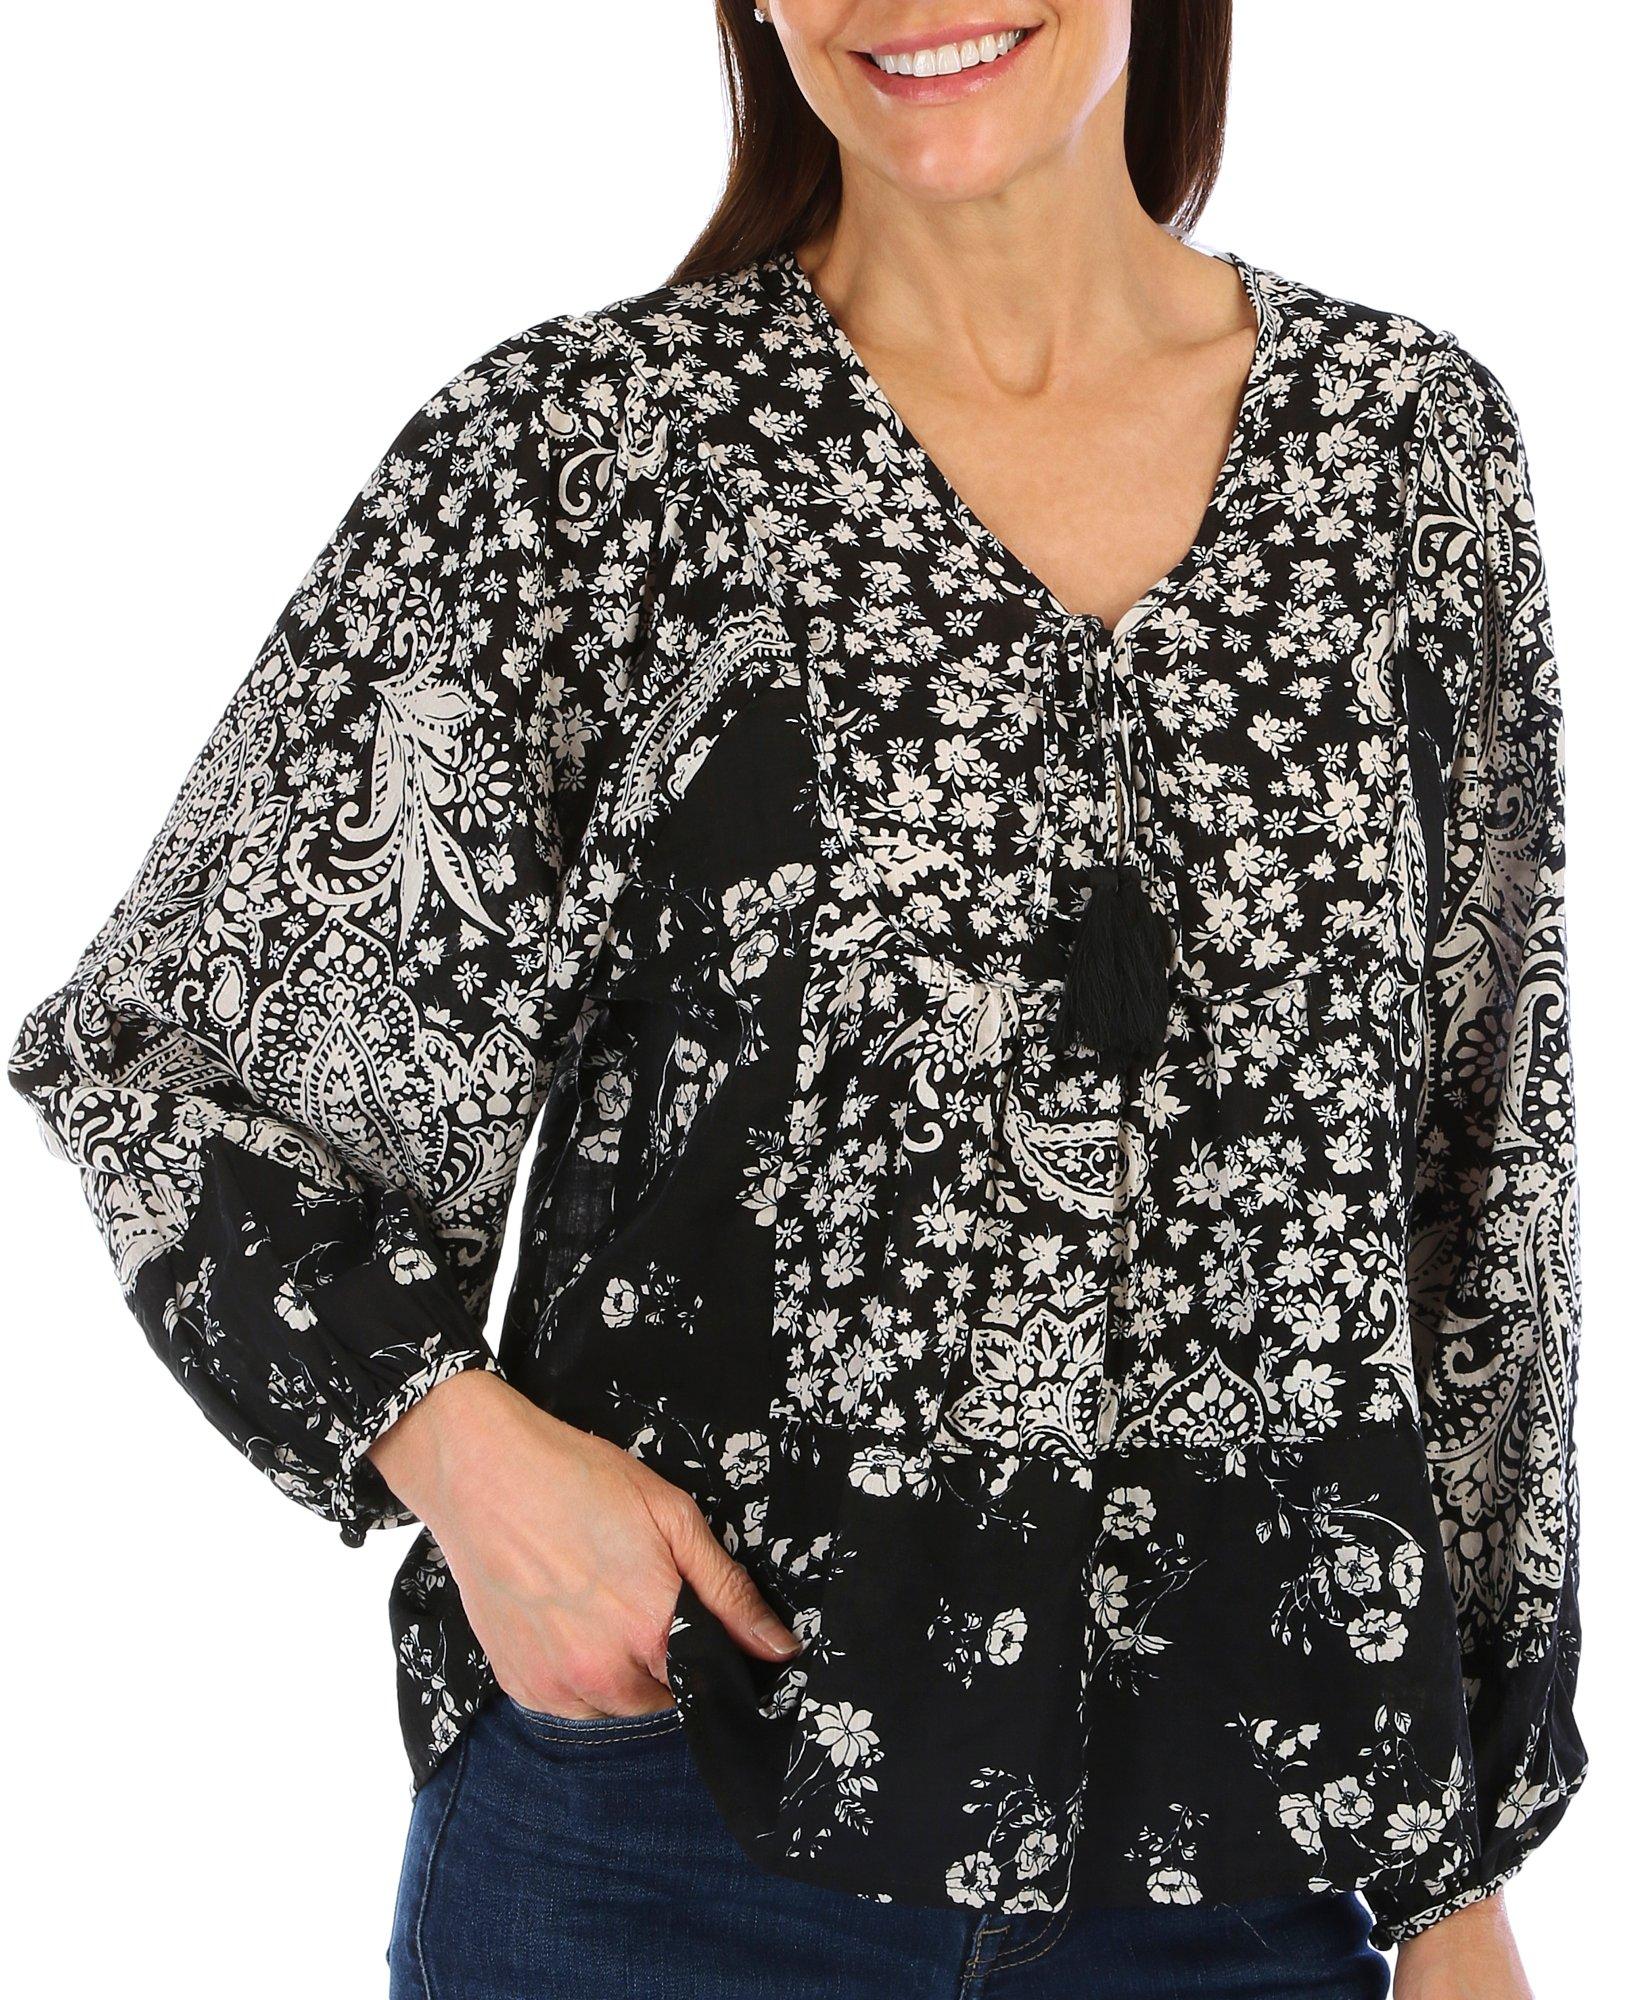 Bunulu Womens Mixed Print Floral Popover Top